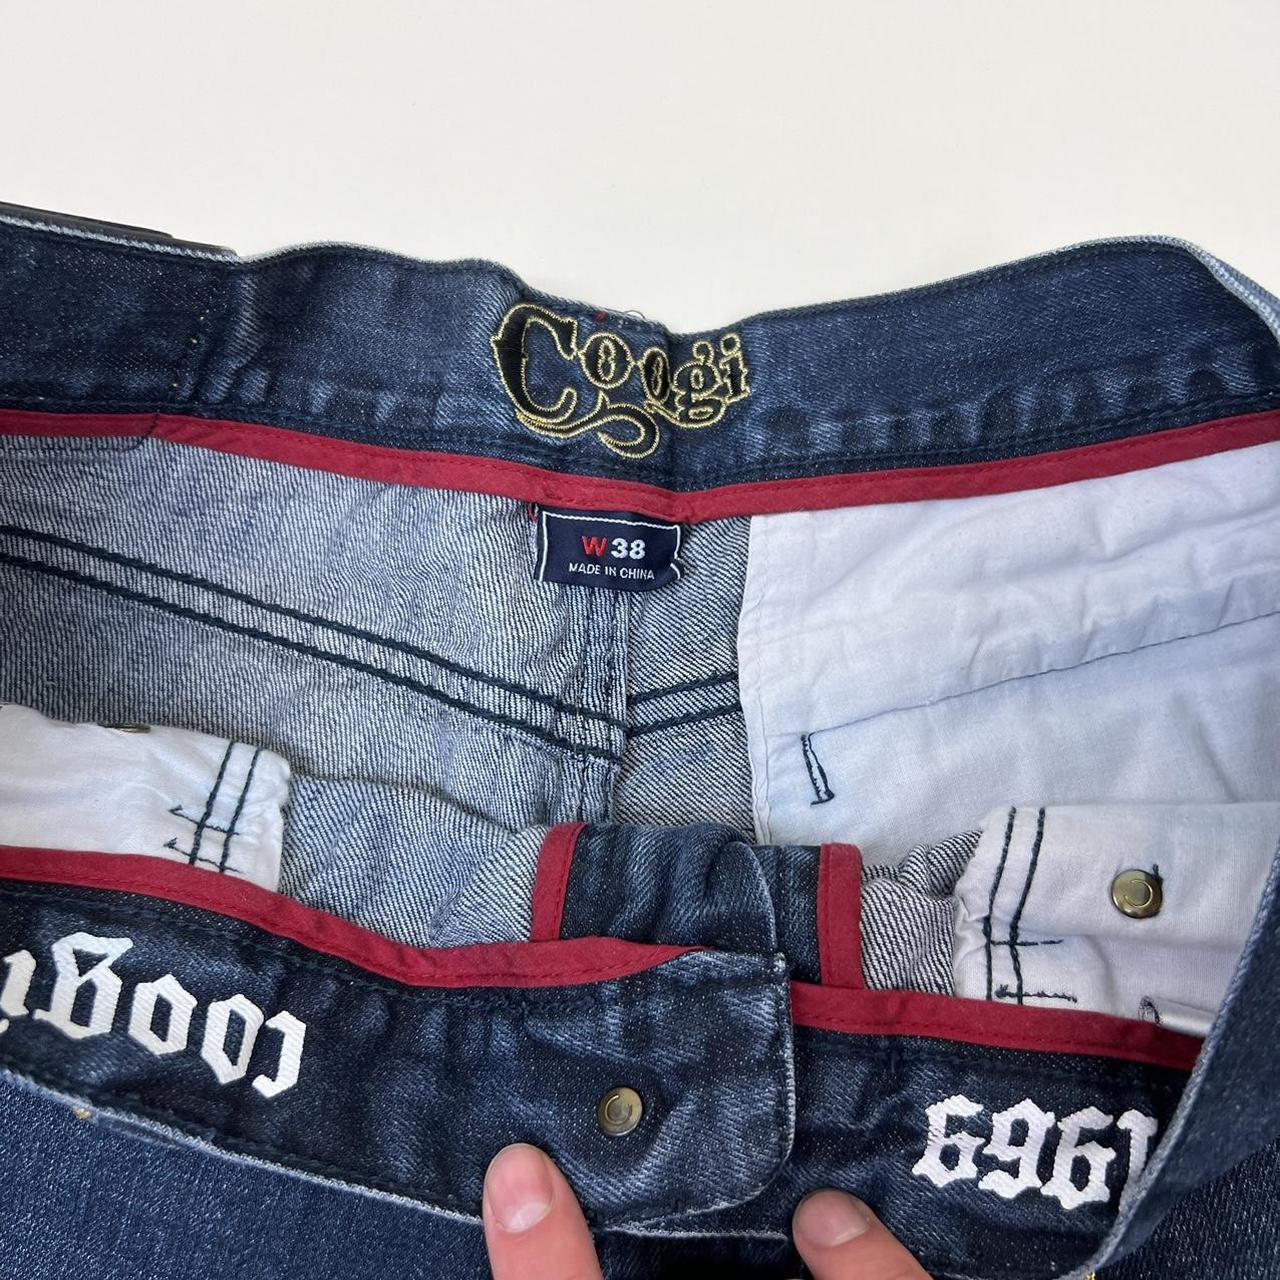 Coogi Men's Blue and White Jeans (4)